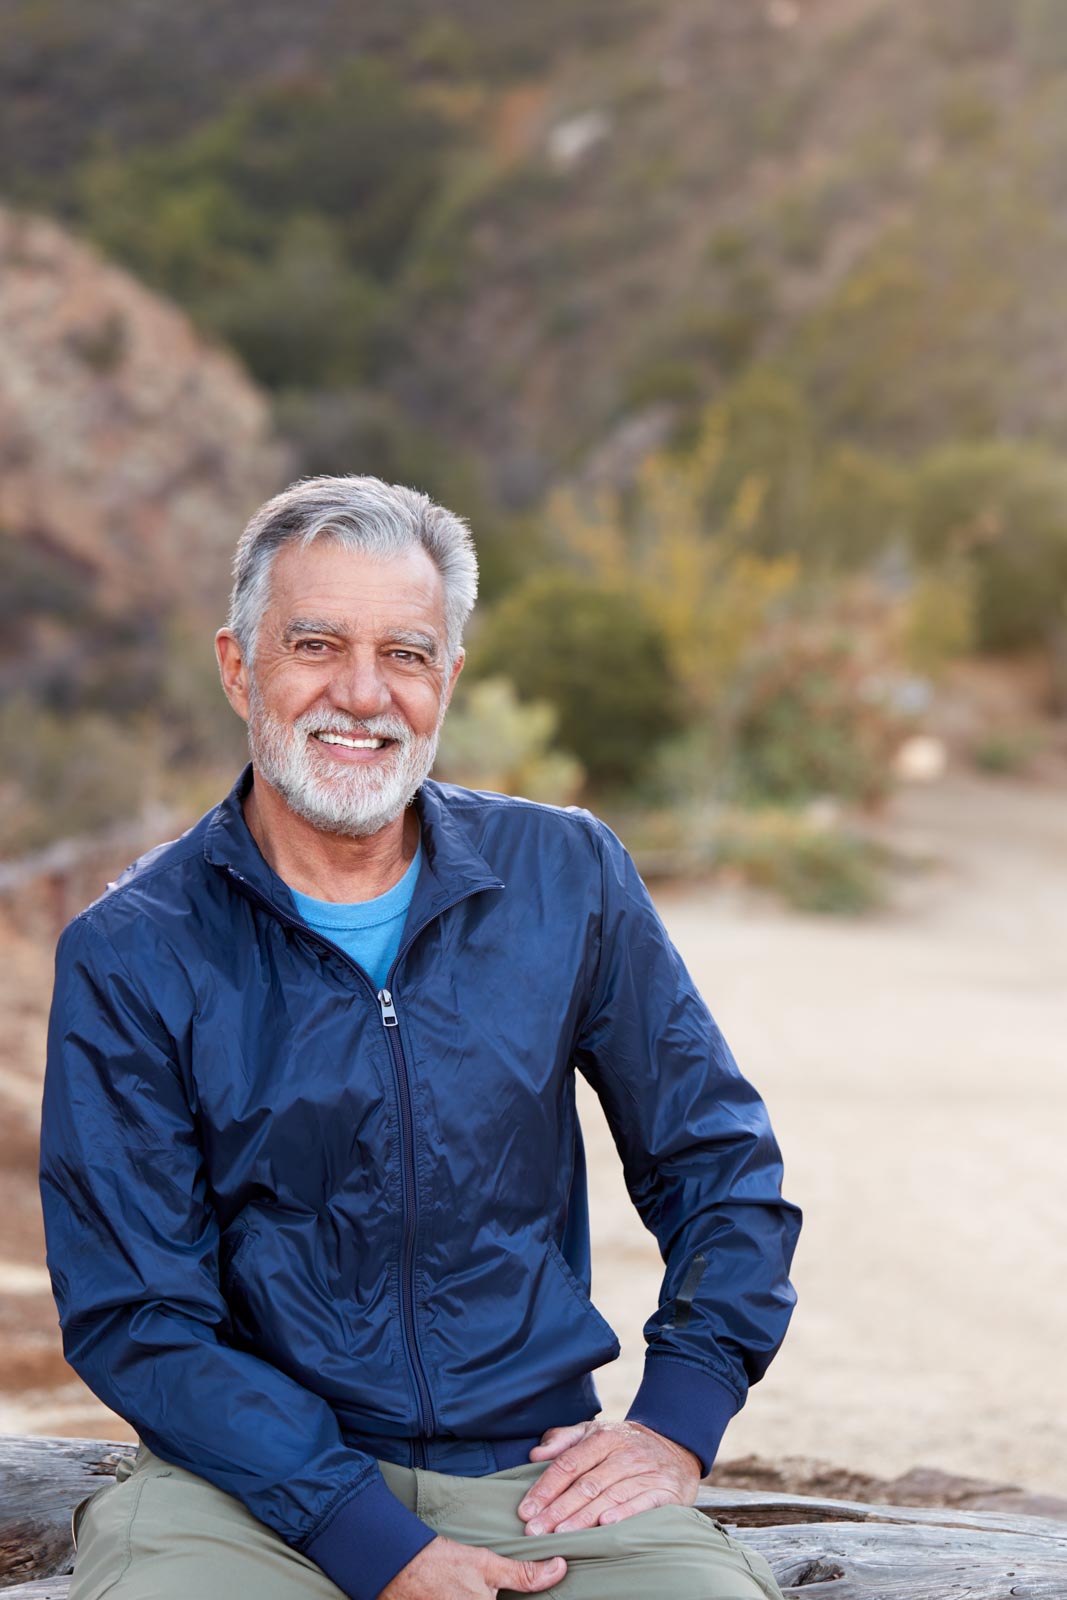 Chronic pain relief is possible! San Bernardino resident smiles again after interventional pain management at California Sports and Spine Center.